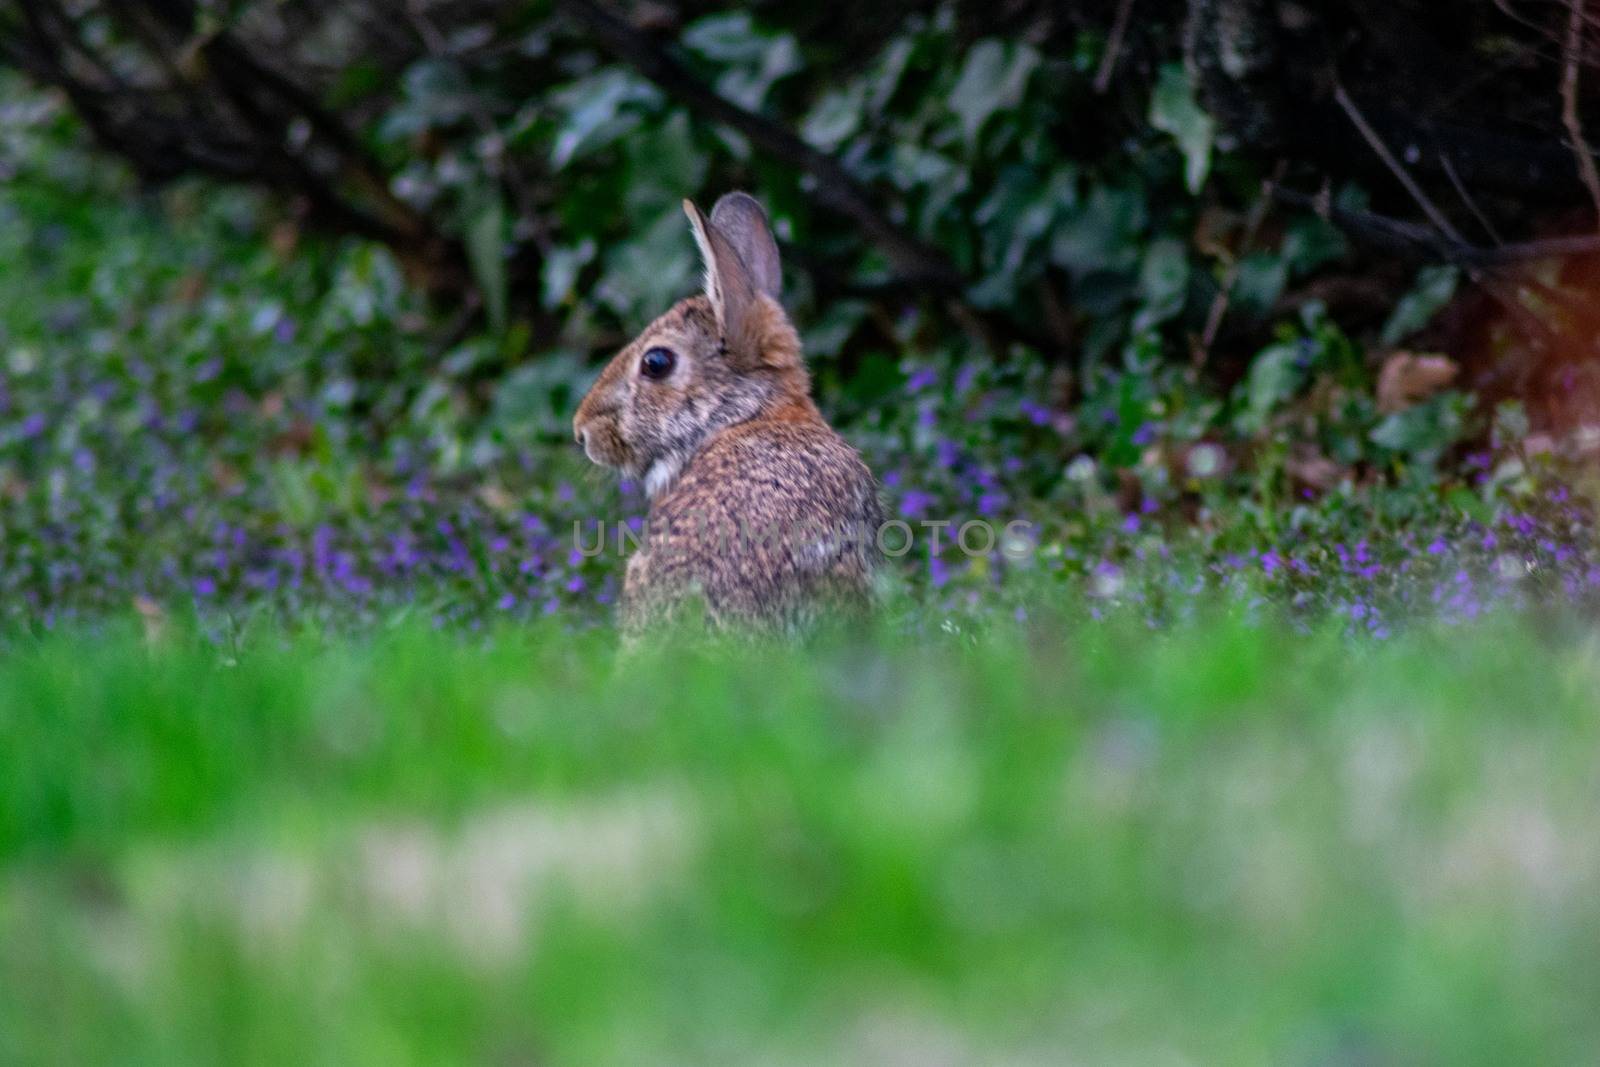 A Small Rabbit Peaking It's Head Up Above the Grass